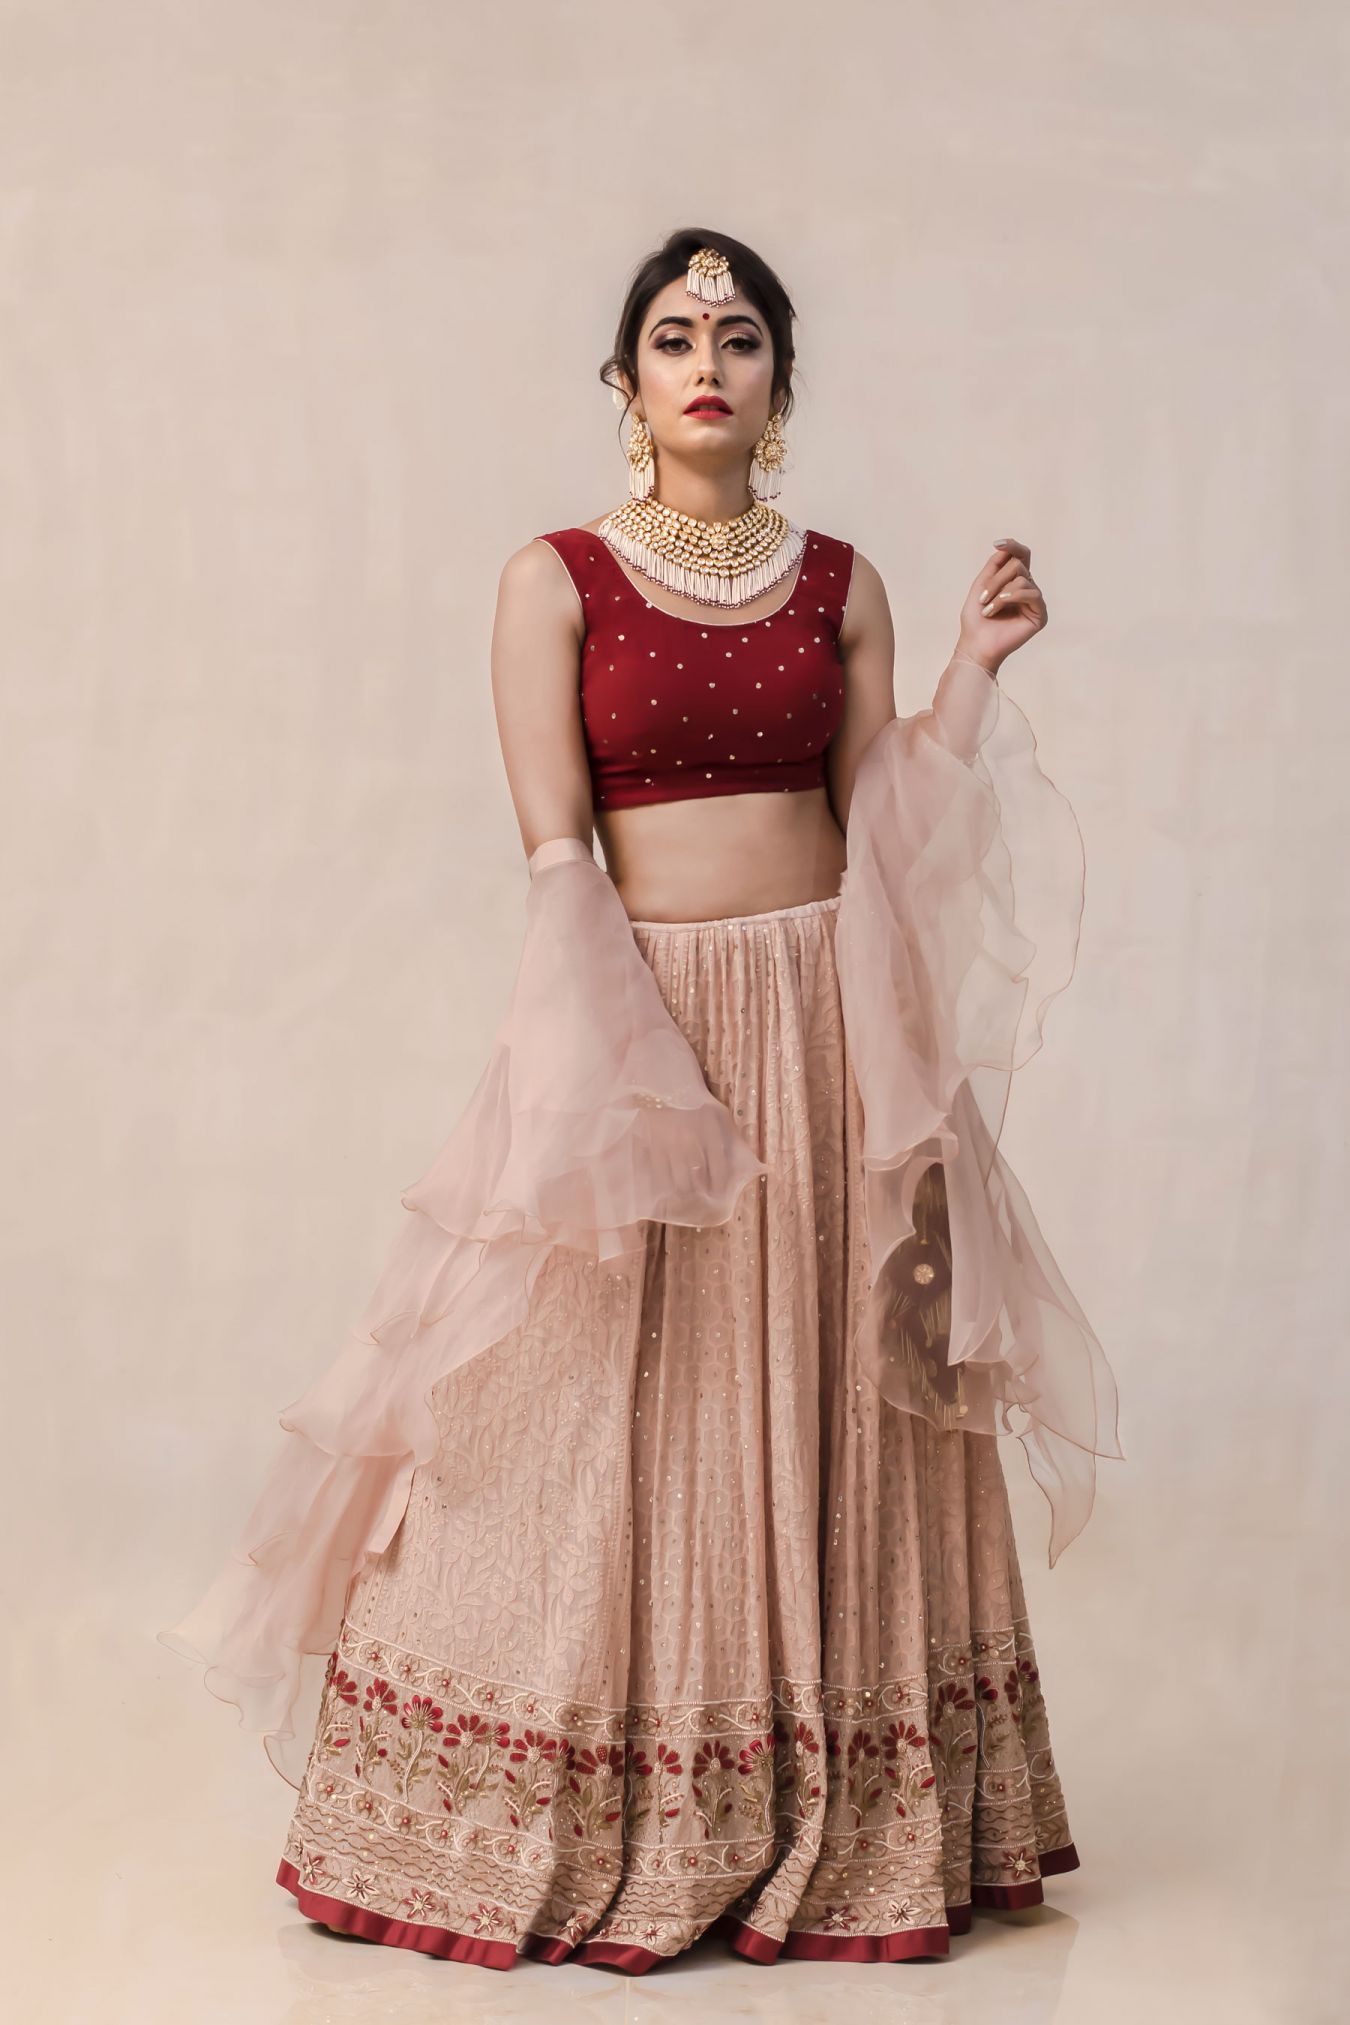 A Romantic Union of Maroon and Earthly Hazelnut Tone Creating a Unique Ensemble of Handcrafted Chikankari Lehenga.